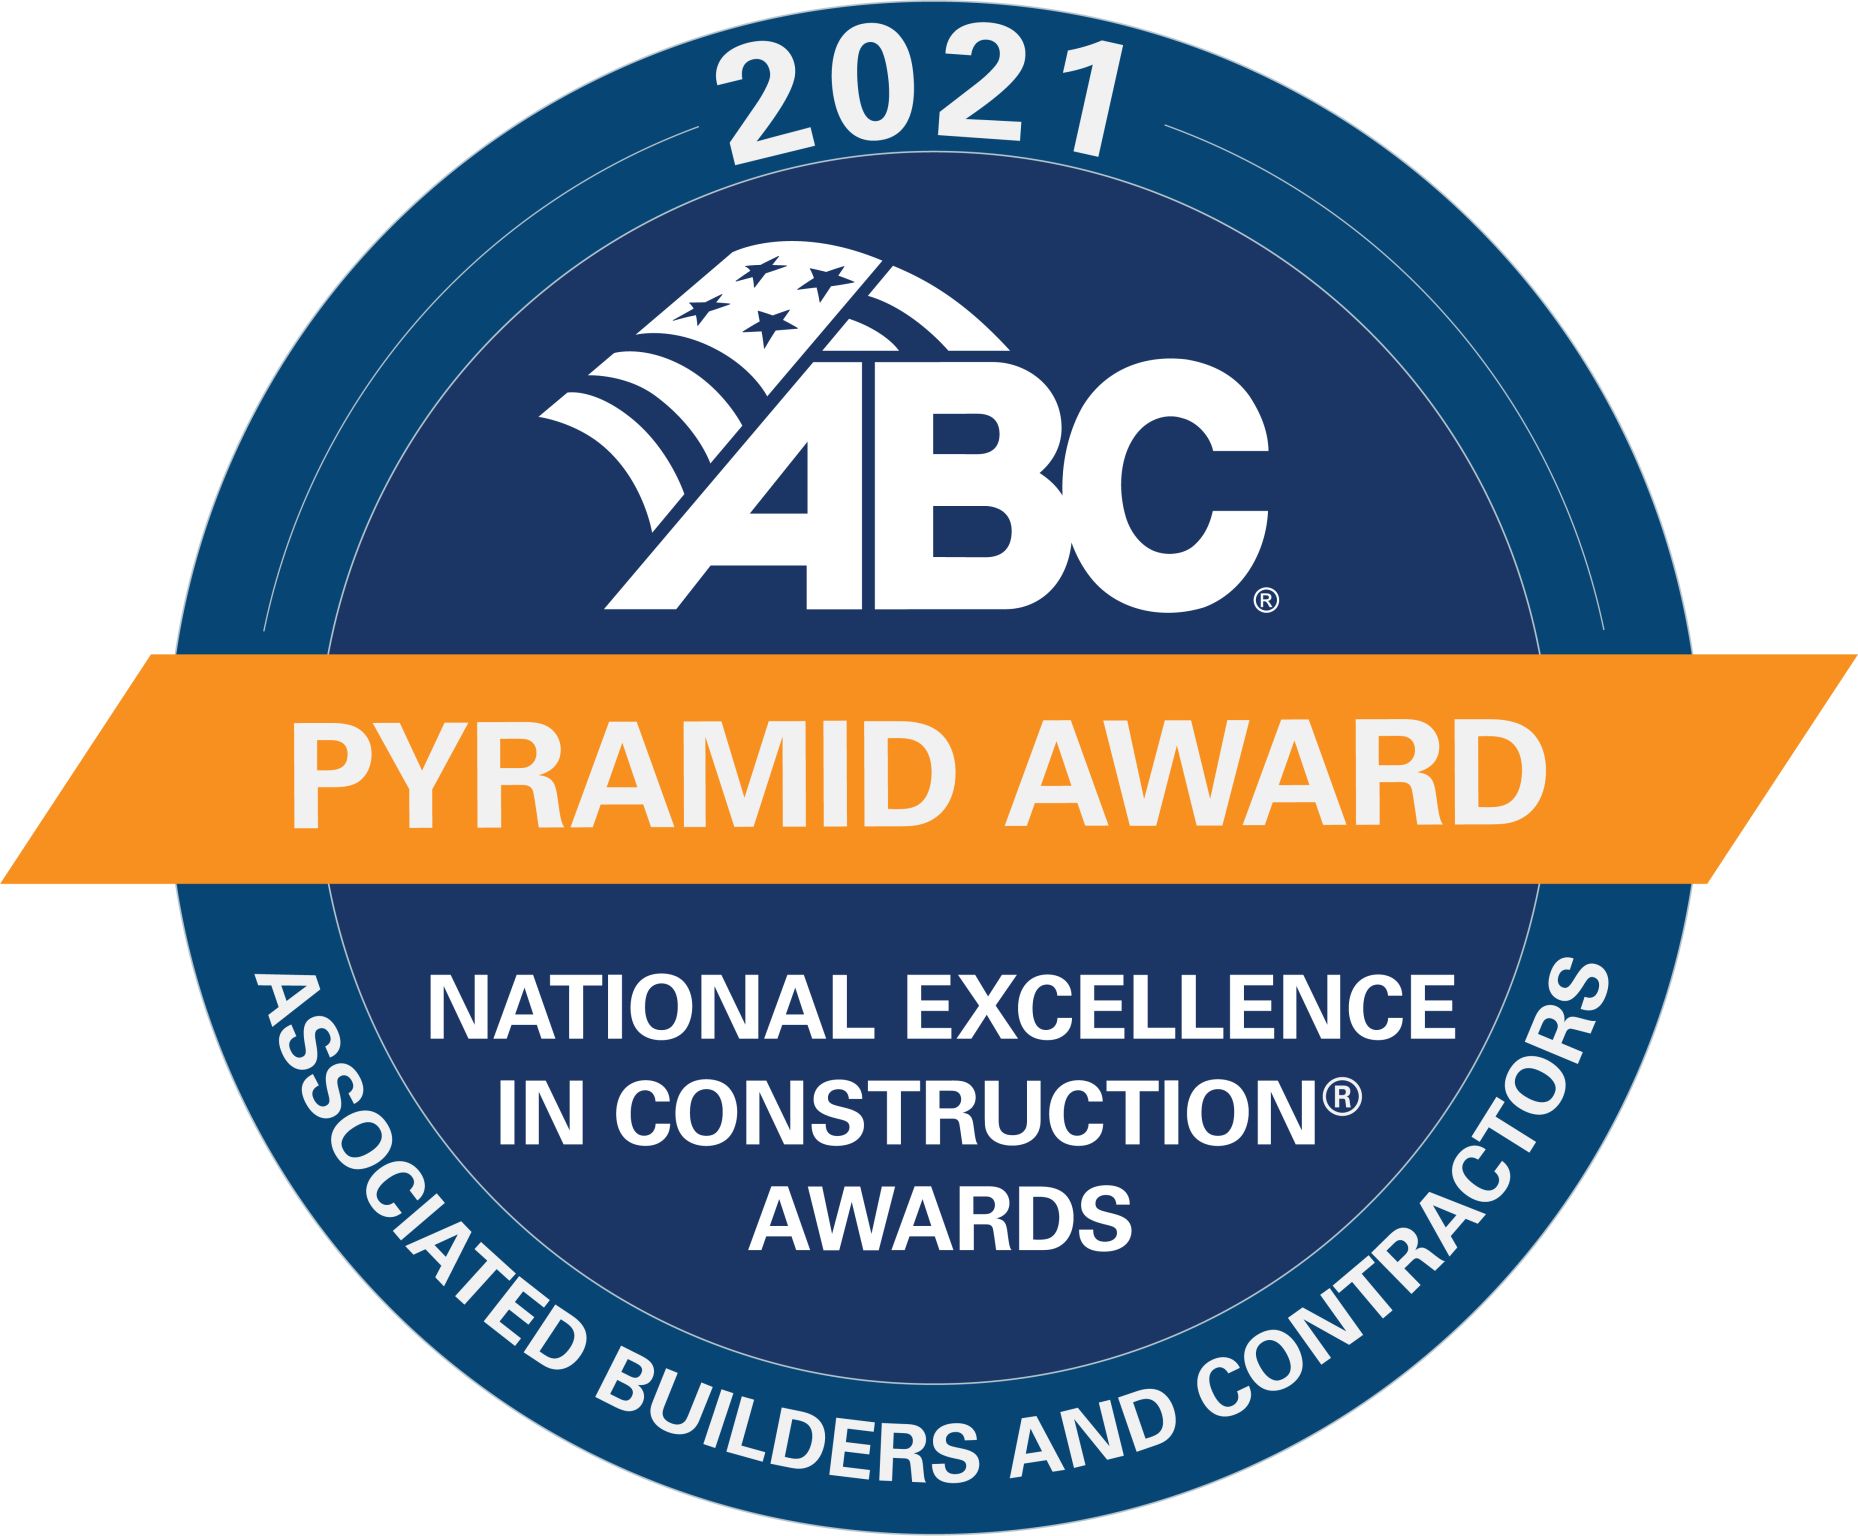 Cox Business Convention Center Project Awarded with 2021 National Excellence in Construction